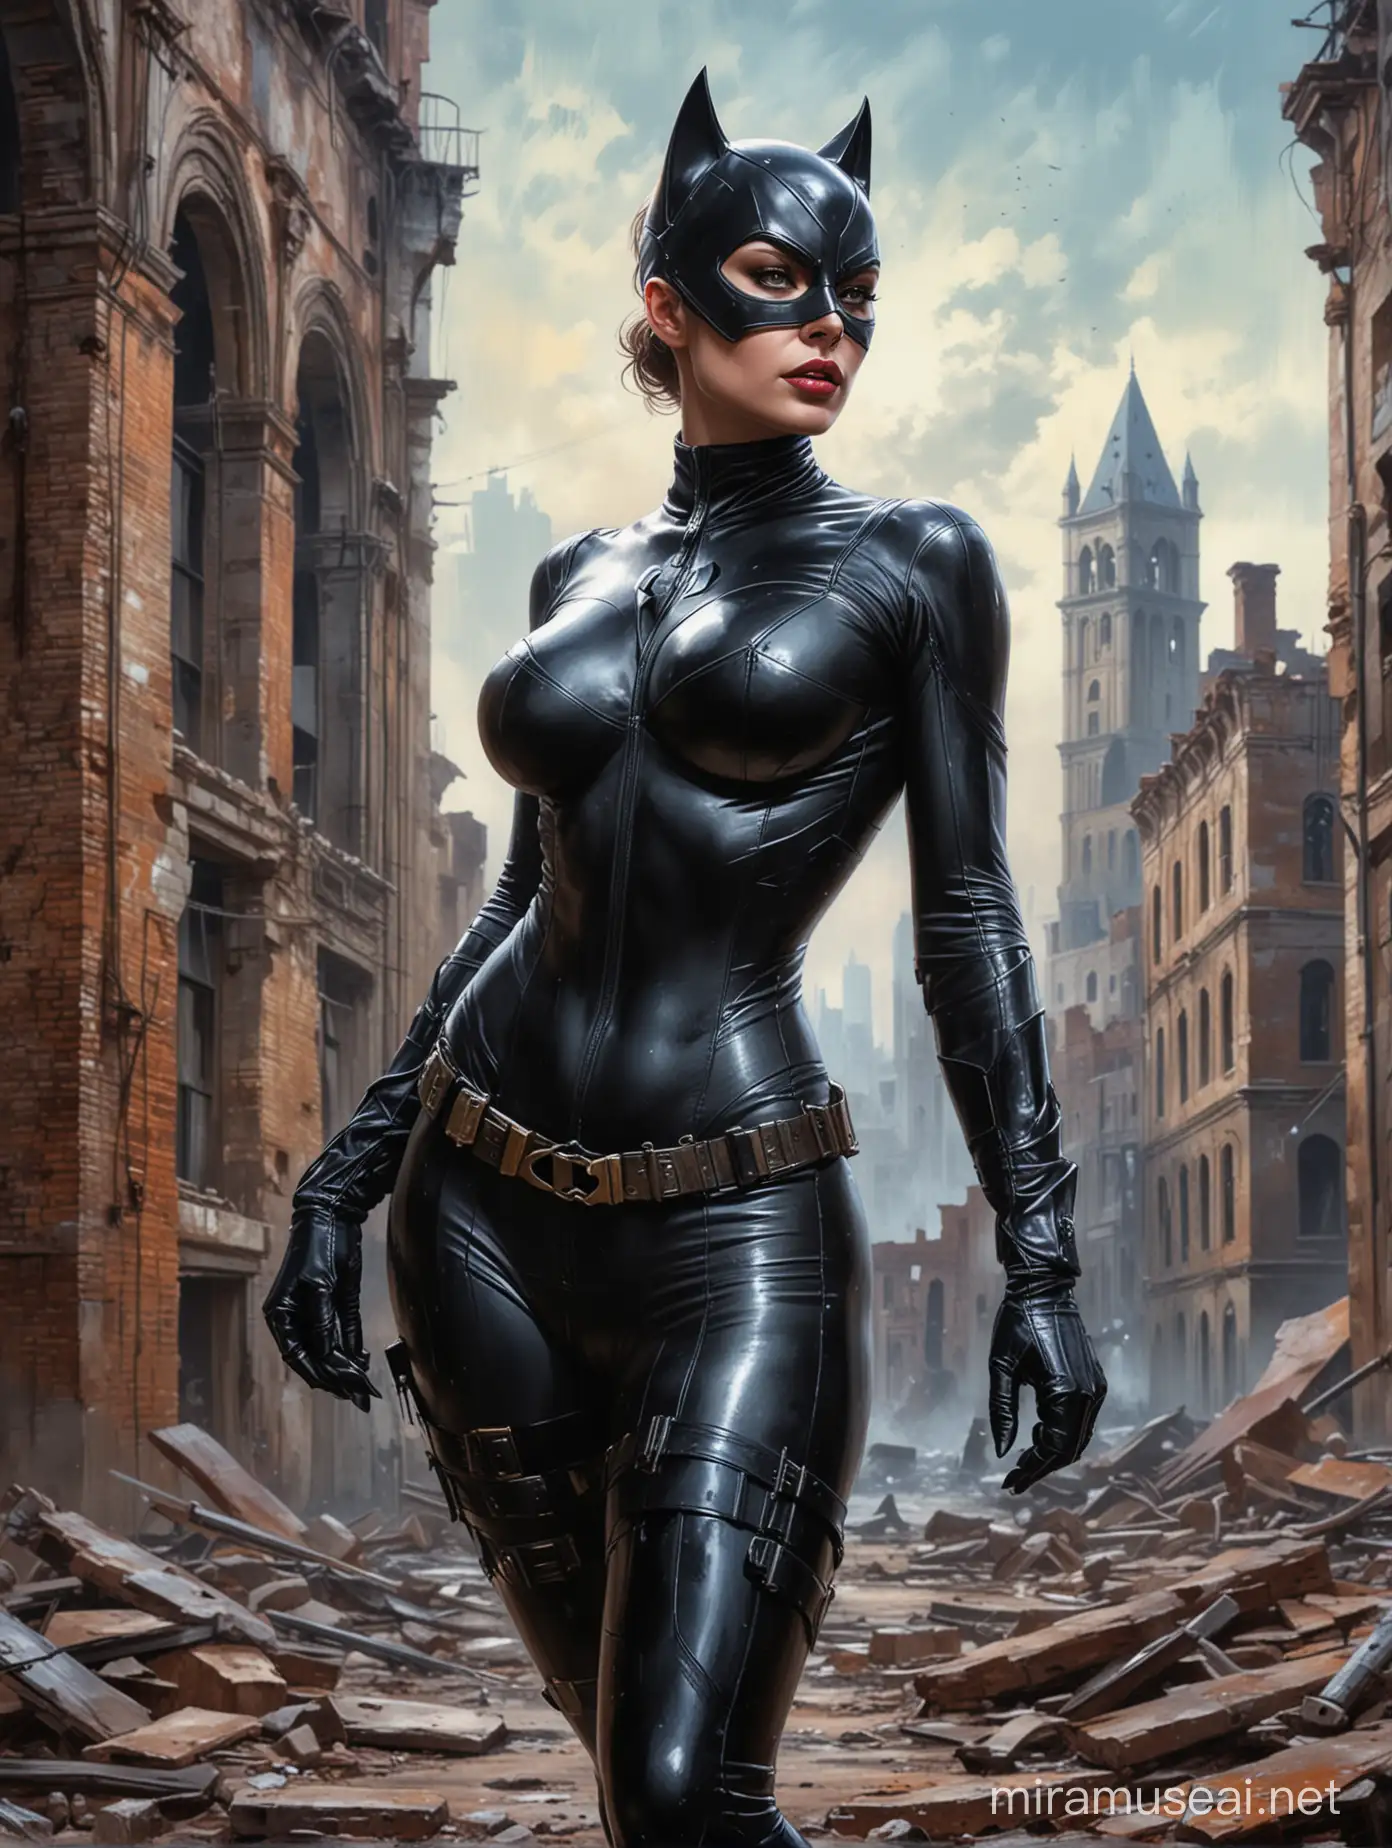 Sensual Catwoman in Cinematic City Ruins